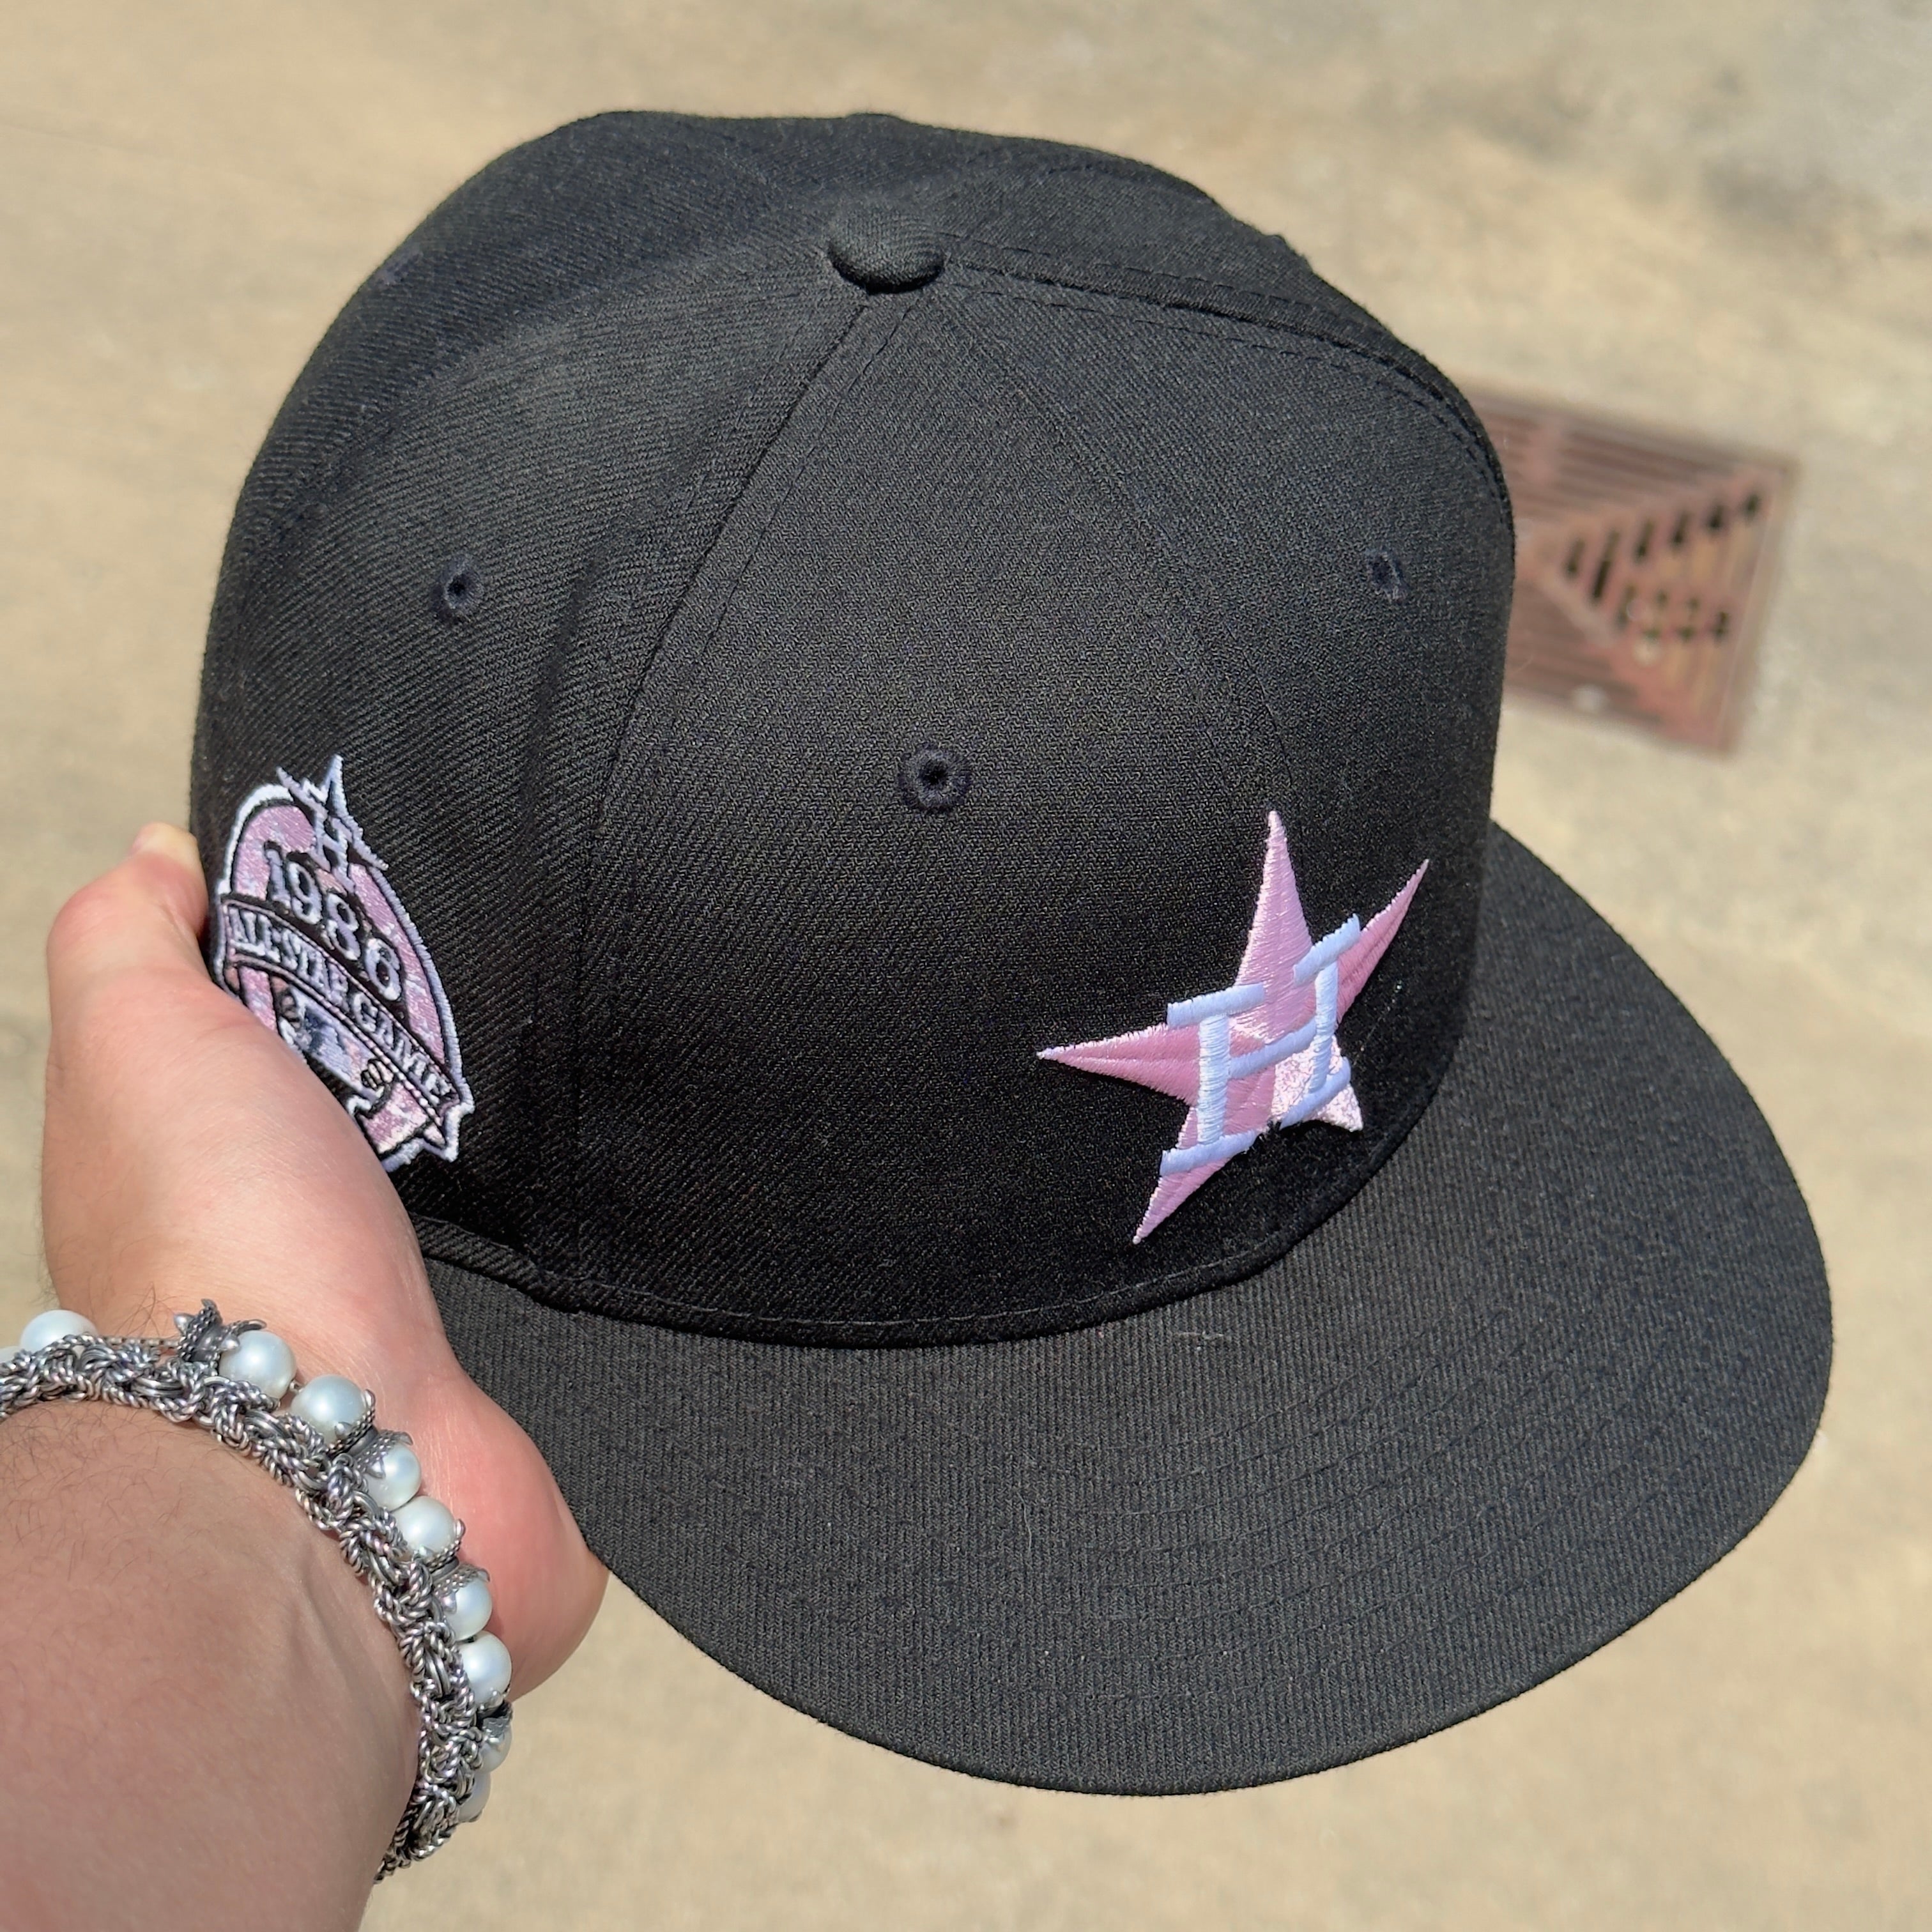 1/2 USED Black Pink Houston Astros 1986 All Star Game 59fifty New Era Fitted Hat Cap